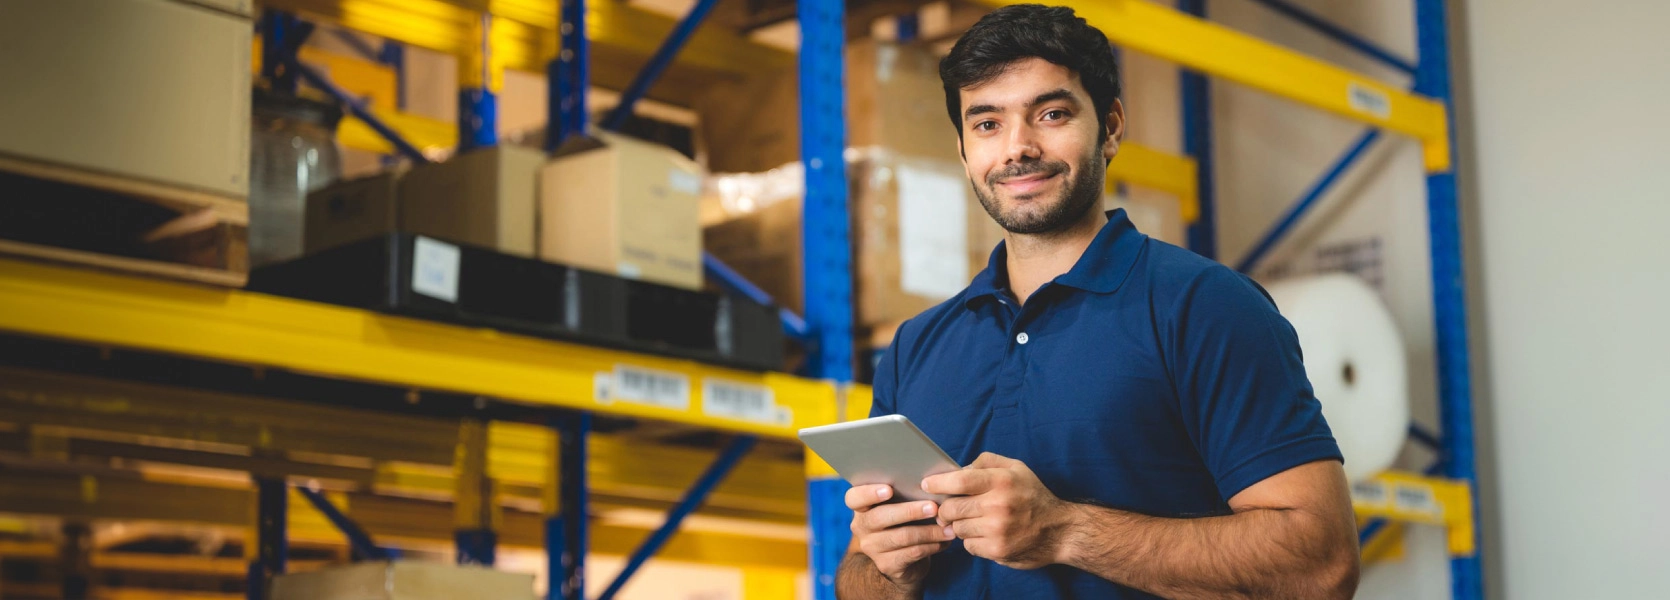 Smiling man standing with tablet in warehouse